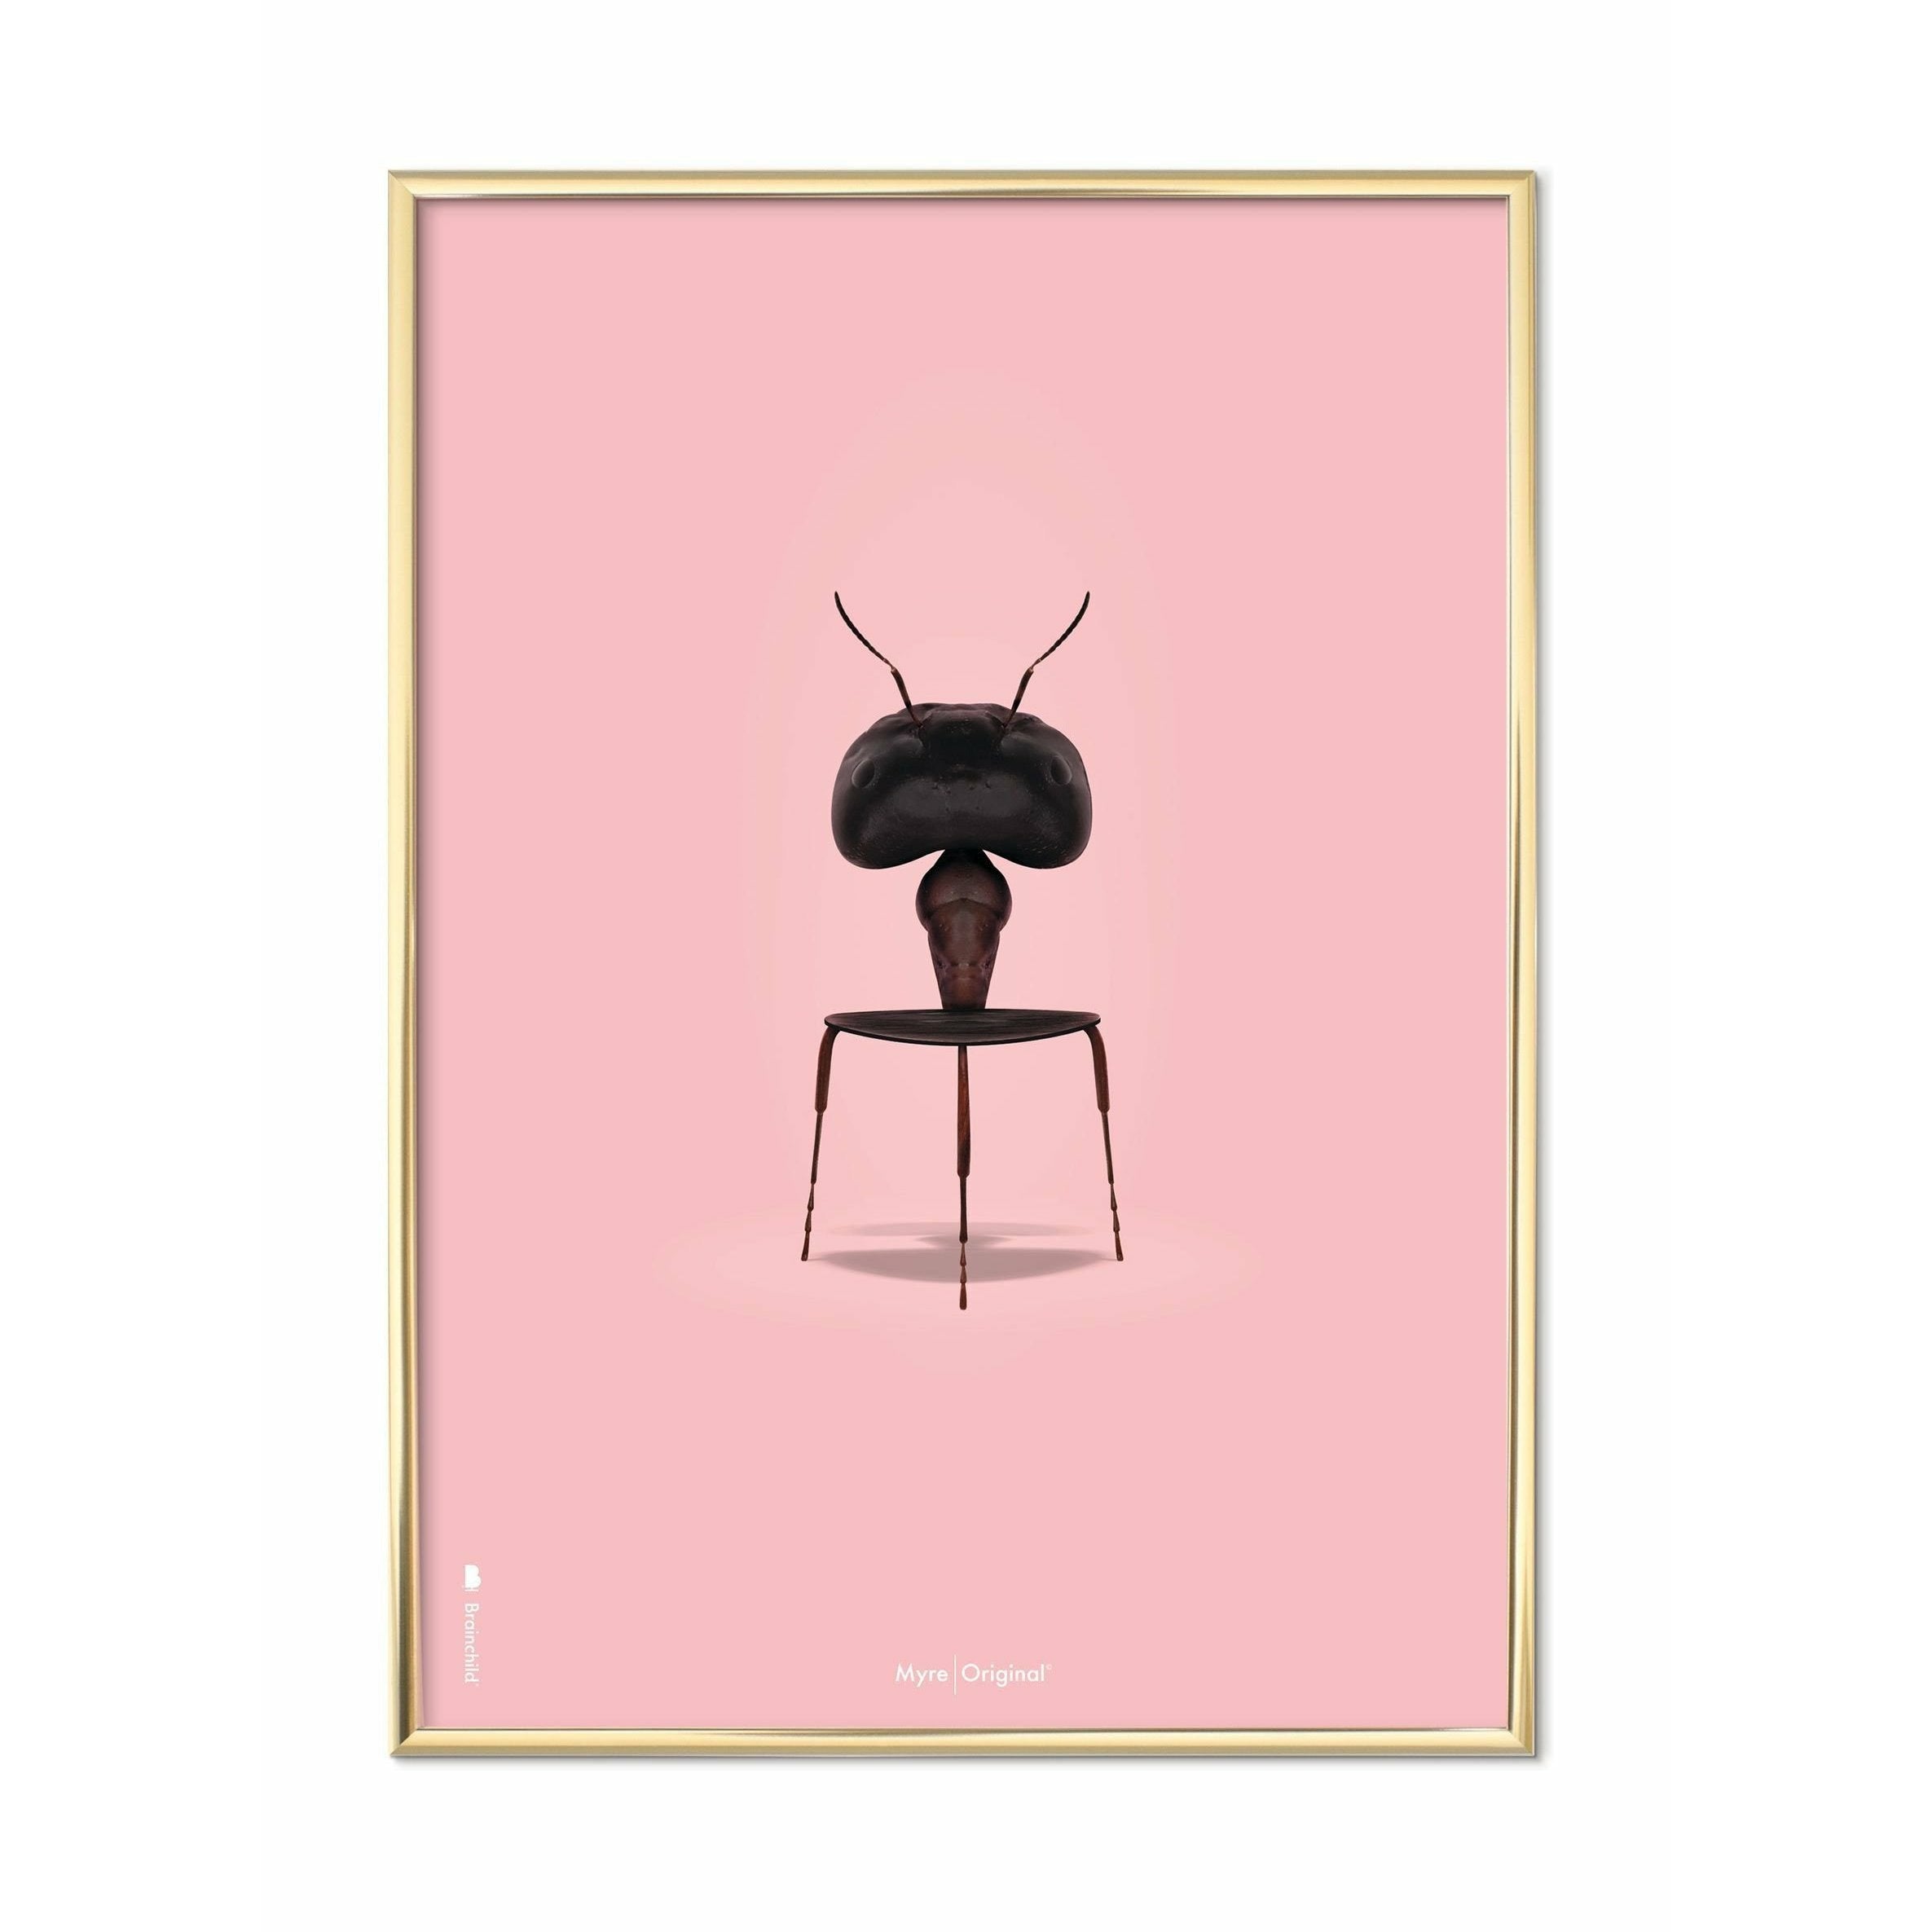 Brainchild Ant Classic Poster, Brass Colored Frame 30x40 Cm, Pink Background